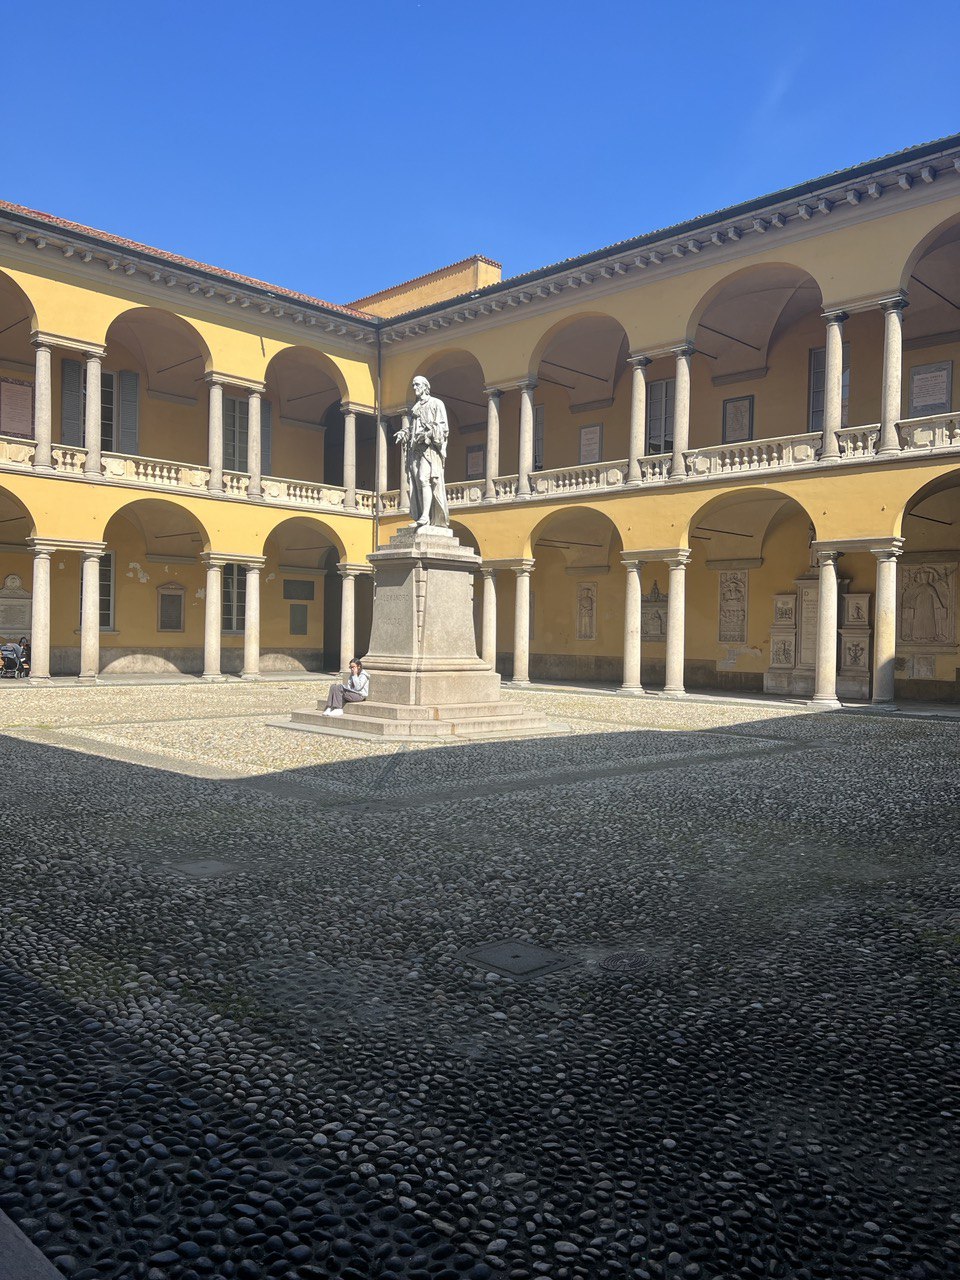 The University of Pavia in North Italy